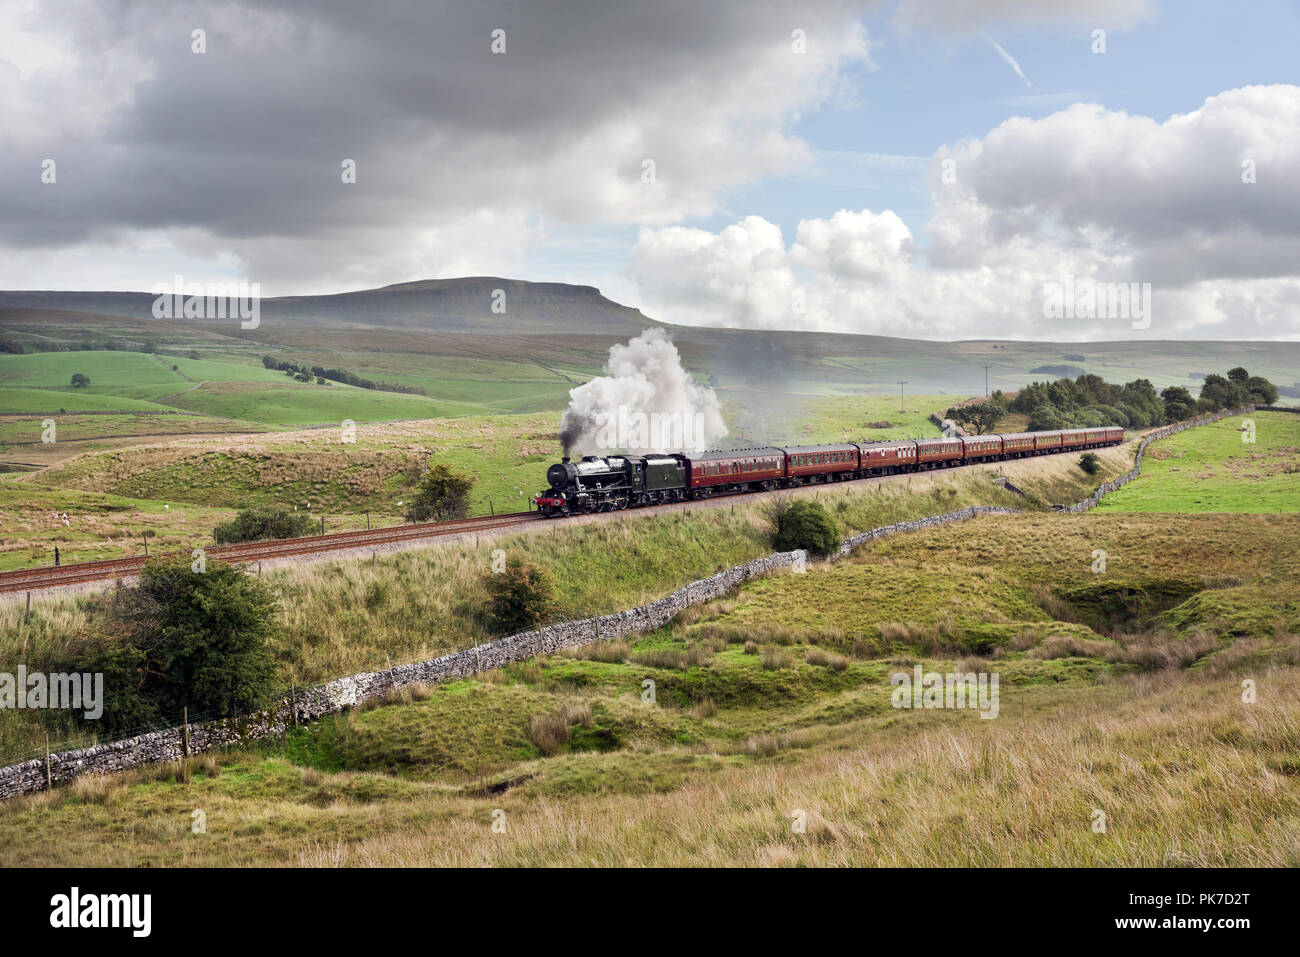 Ribblesdale, UK. 11th September 2018. 'The Cathedrals Express' passes Pen-y-ghent peak, Ribblesdale, in the Yorkshire Dales National Park. The steam special is hauled by a Stanier 8F locomotive build in 1942. The excursion originated at St Albans but is steam hauled from Hellifield (near Skipton) to Carlisle and return. Credit: John Bentley/Alamy Live News Stock Photo